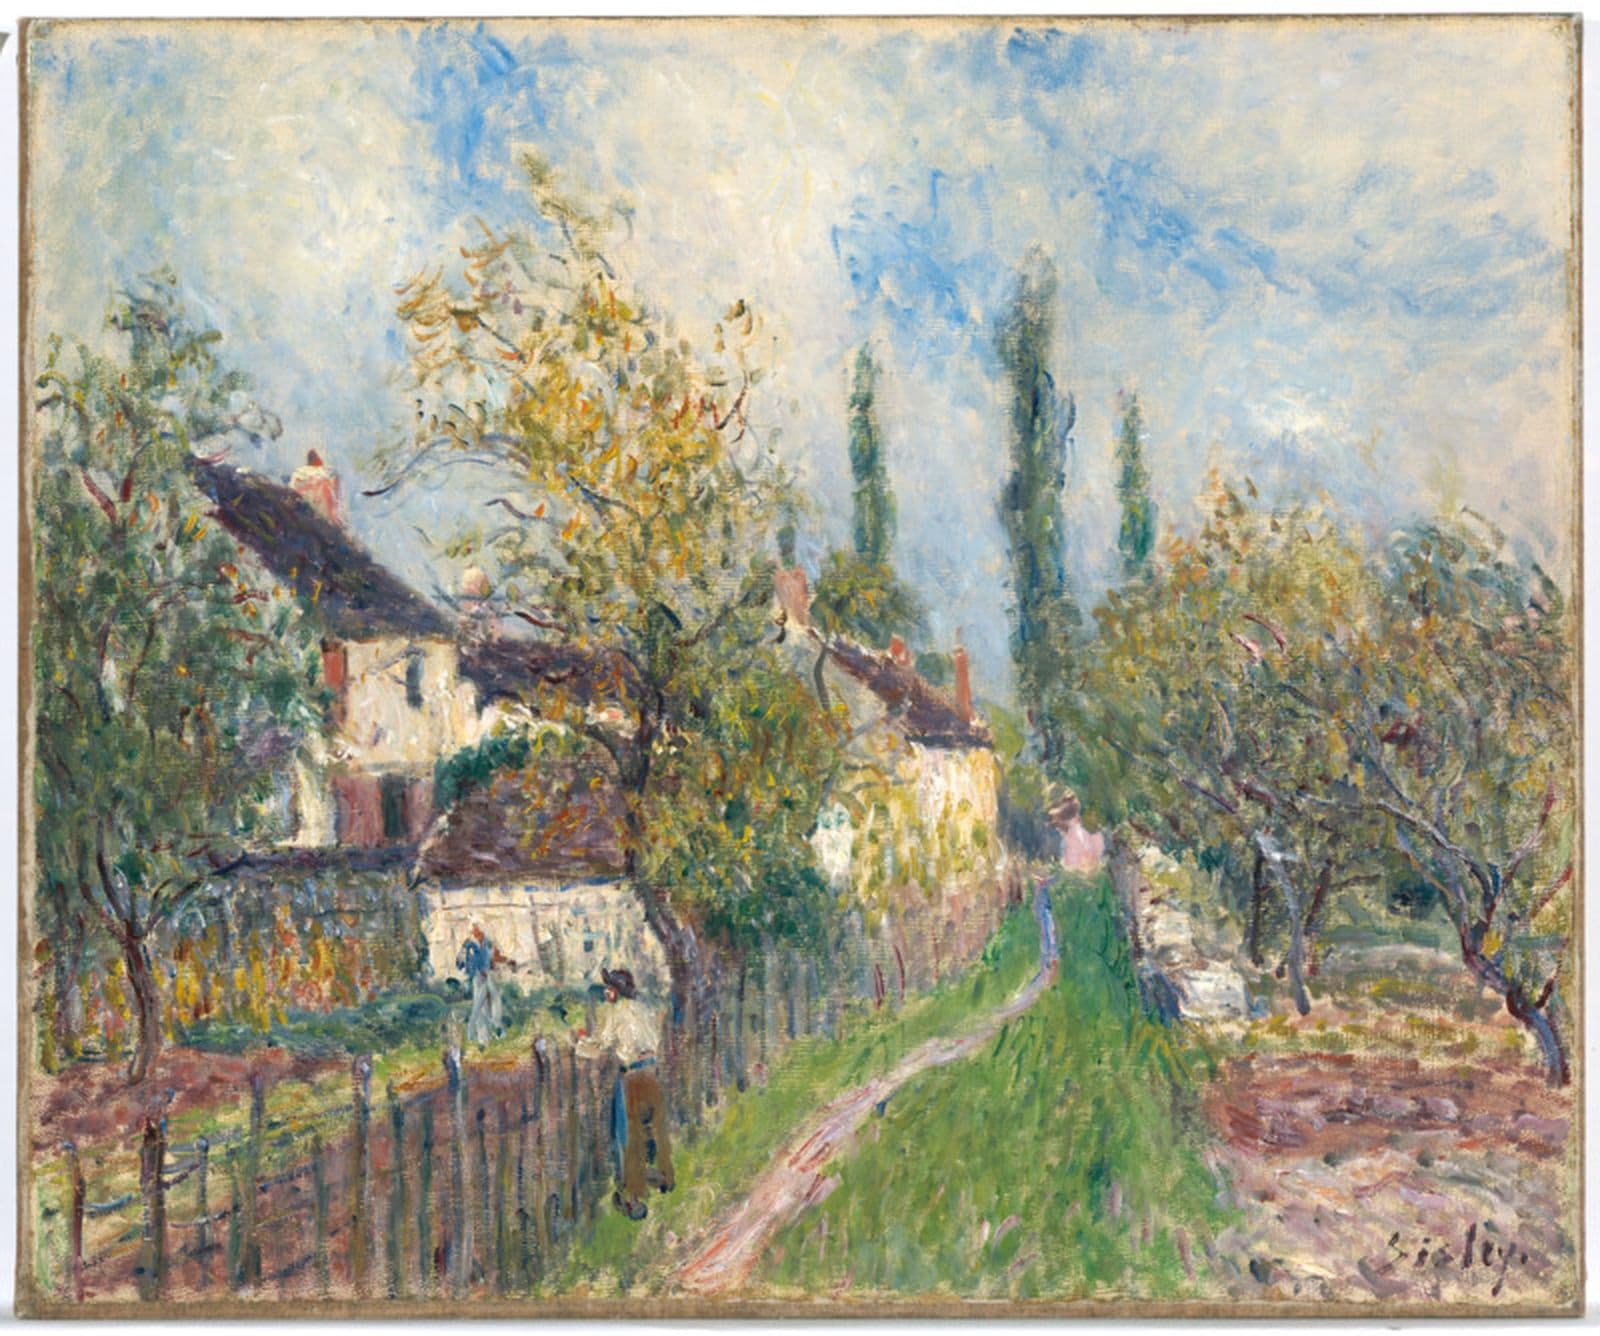 Painting of a grassy path through a village